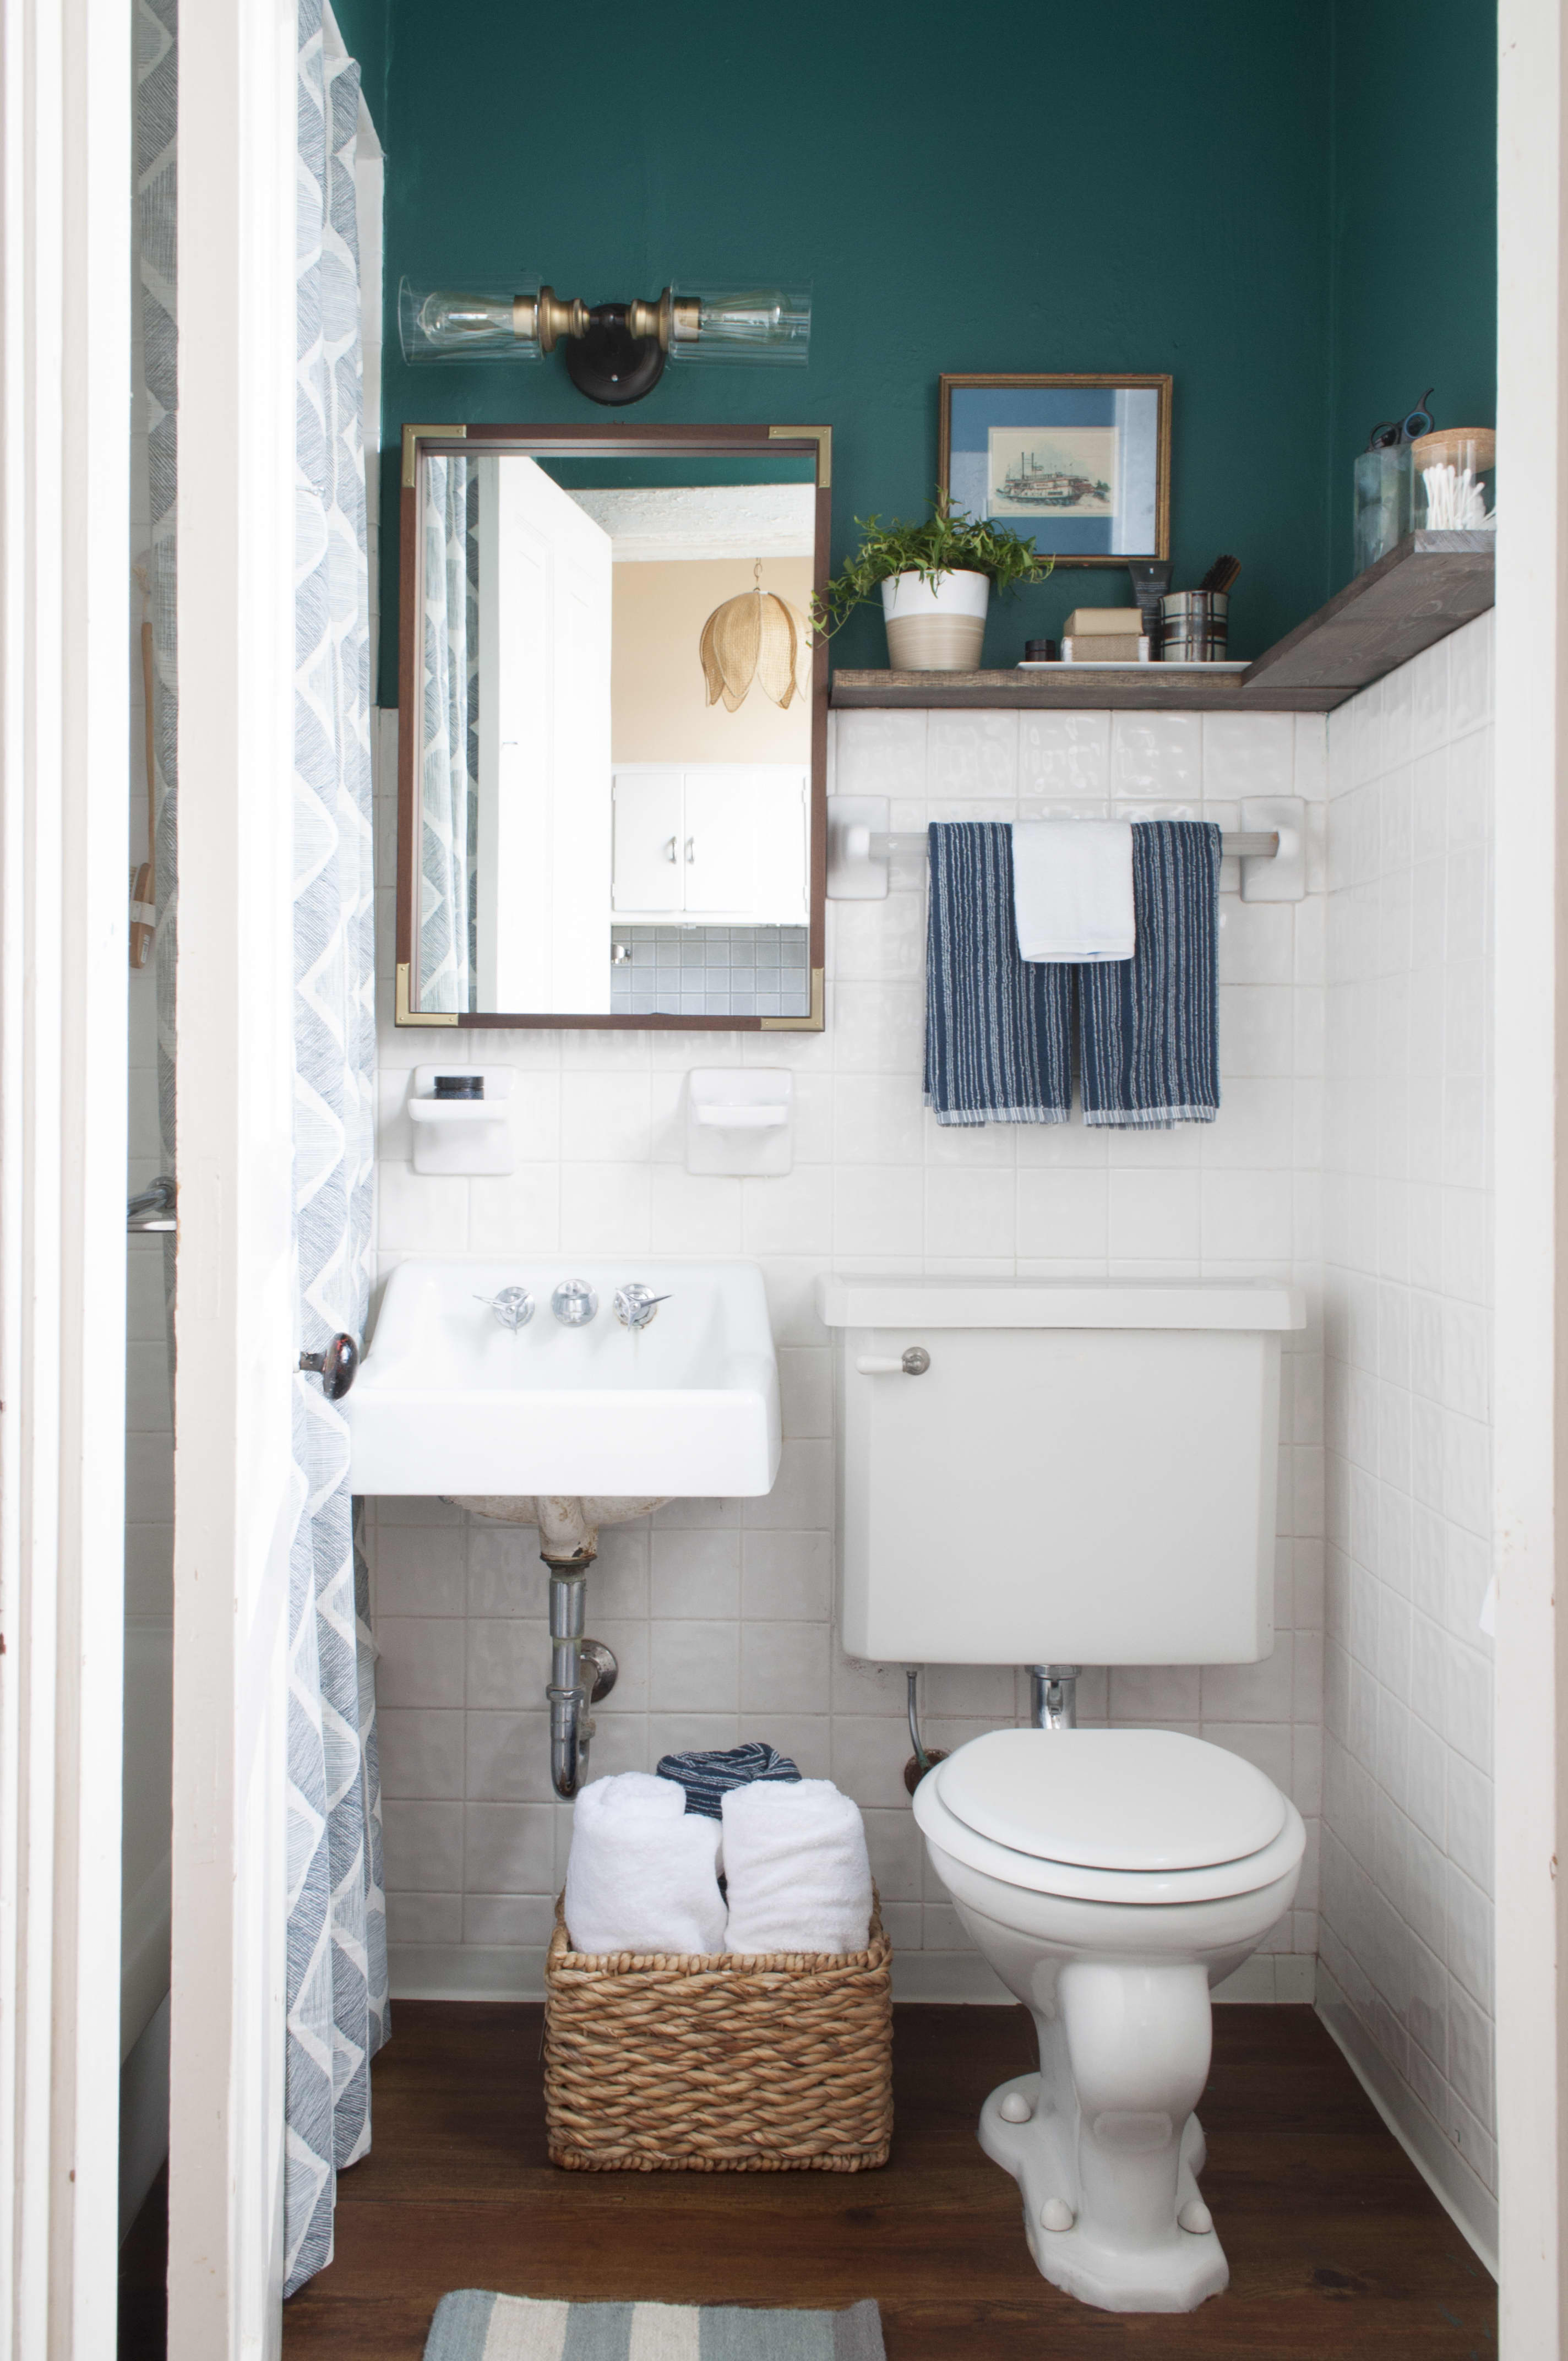 8 Stylish Solutions for Your Totally Icky Rental Bathroom | Apartment